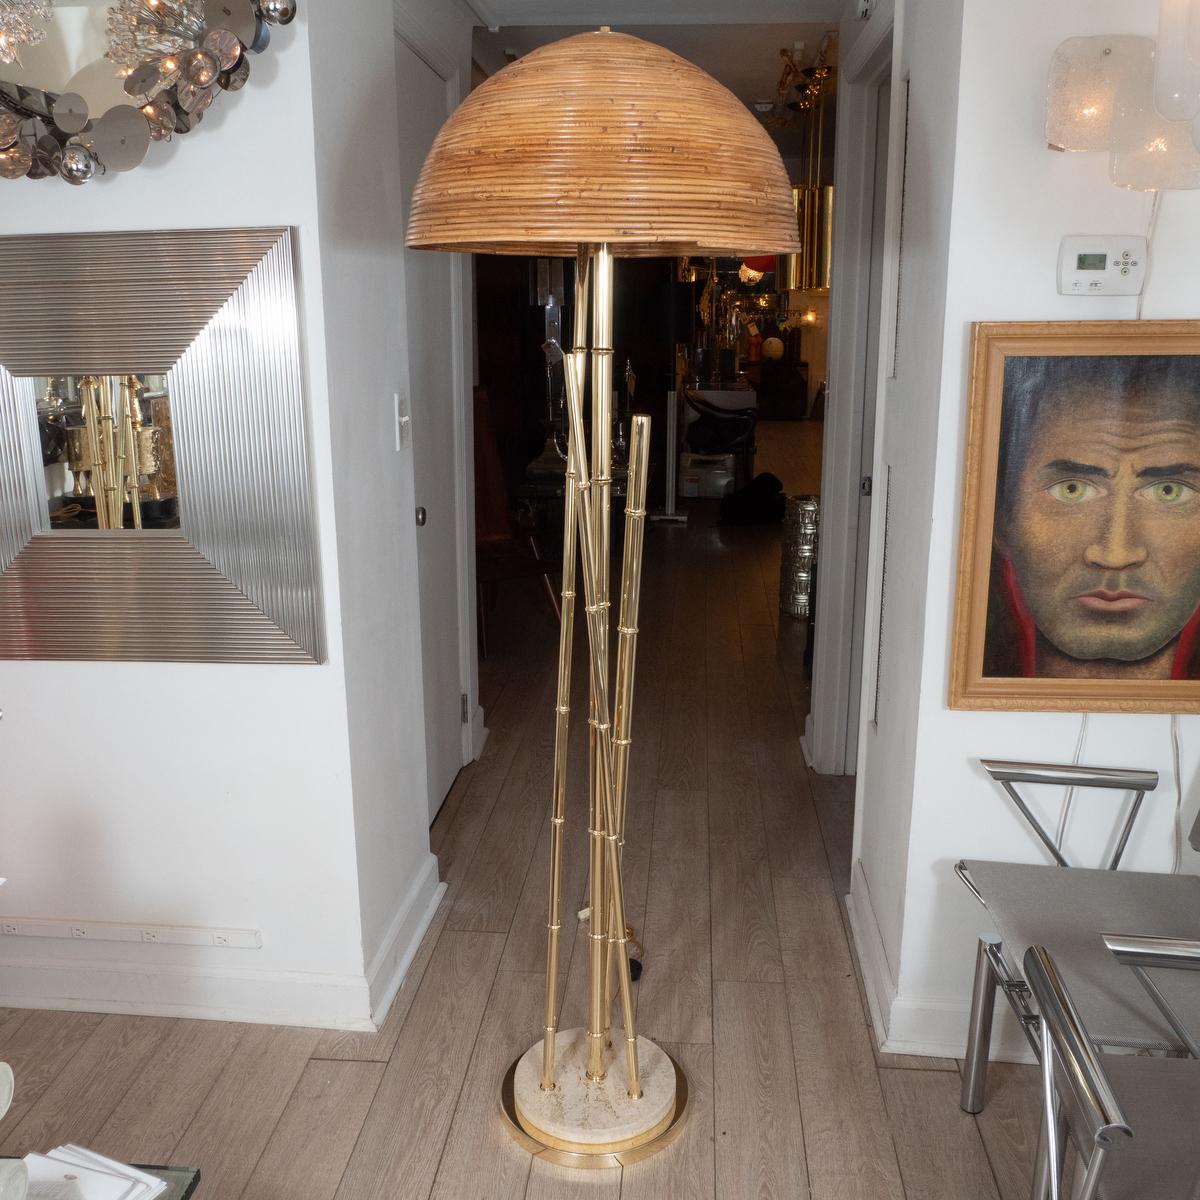 Pair of brass faux bamboo floor lamps with bamboo shades and travertine details at base.